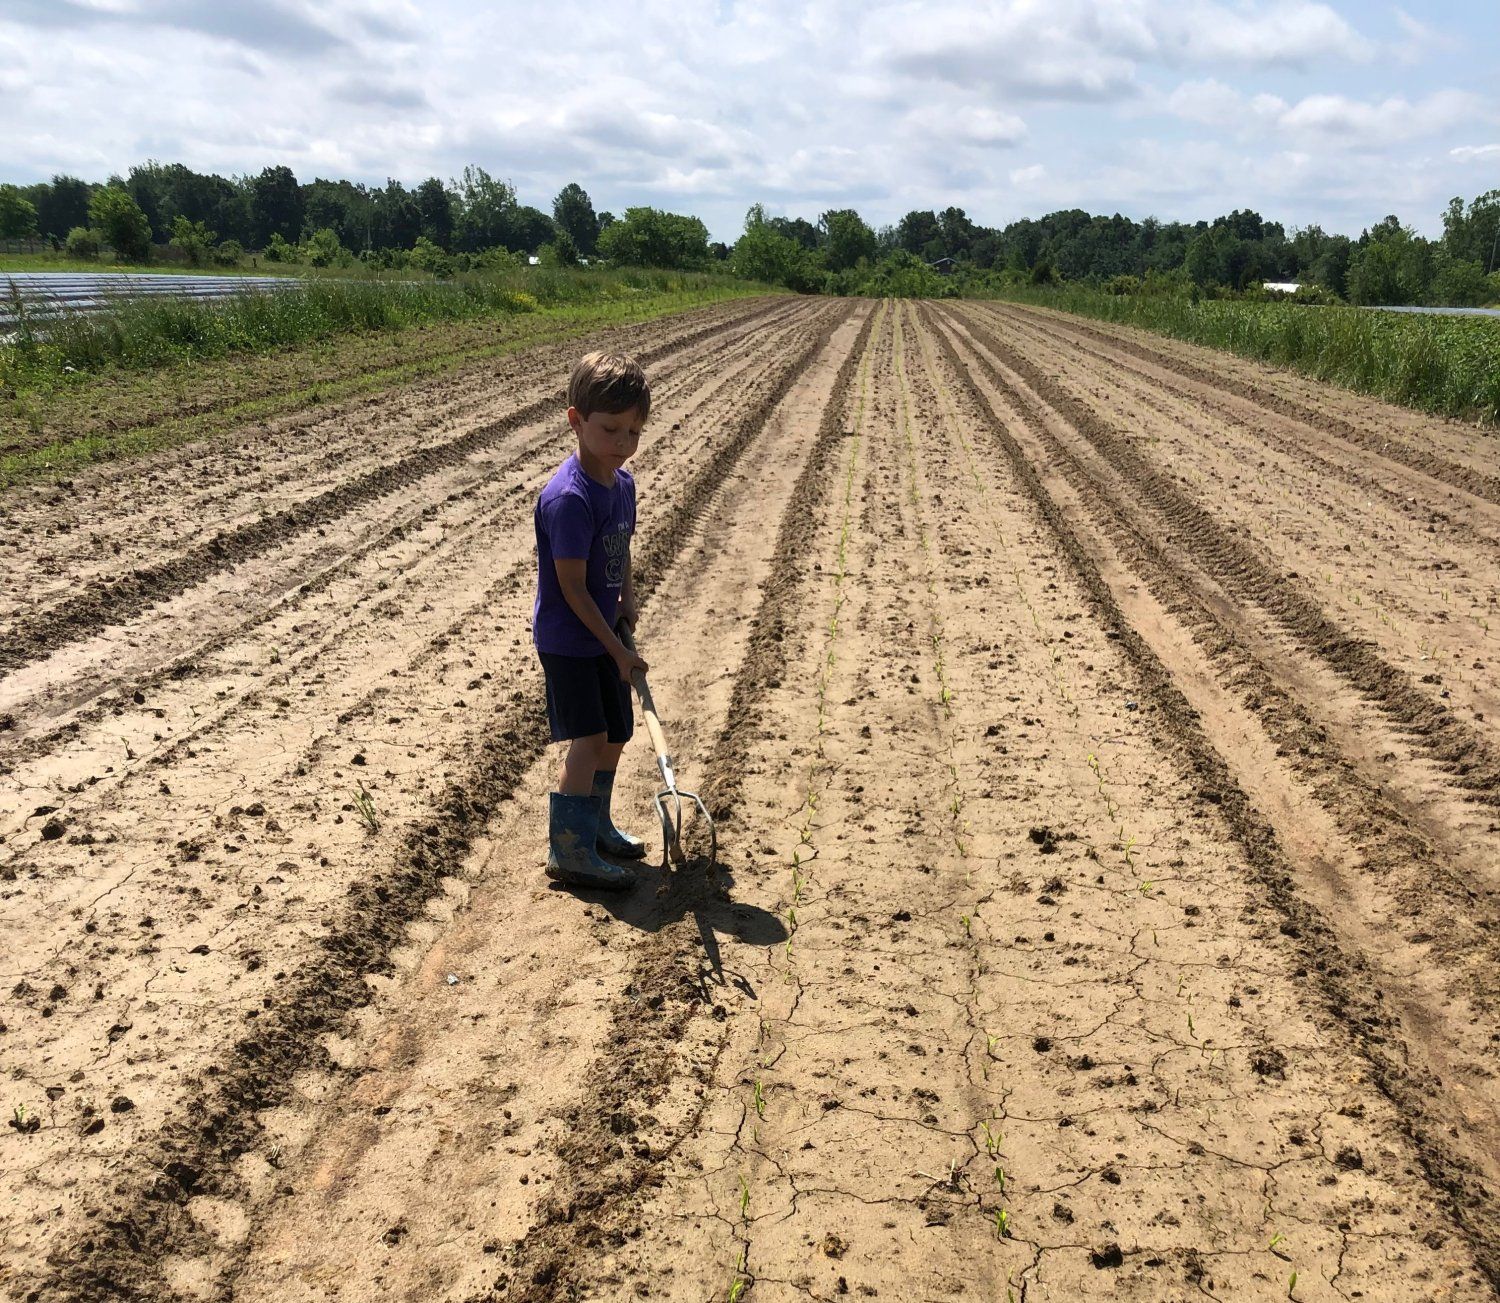 Previous Happening: Farm Happenings for May 31, 2022